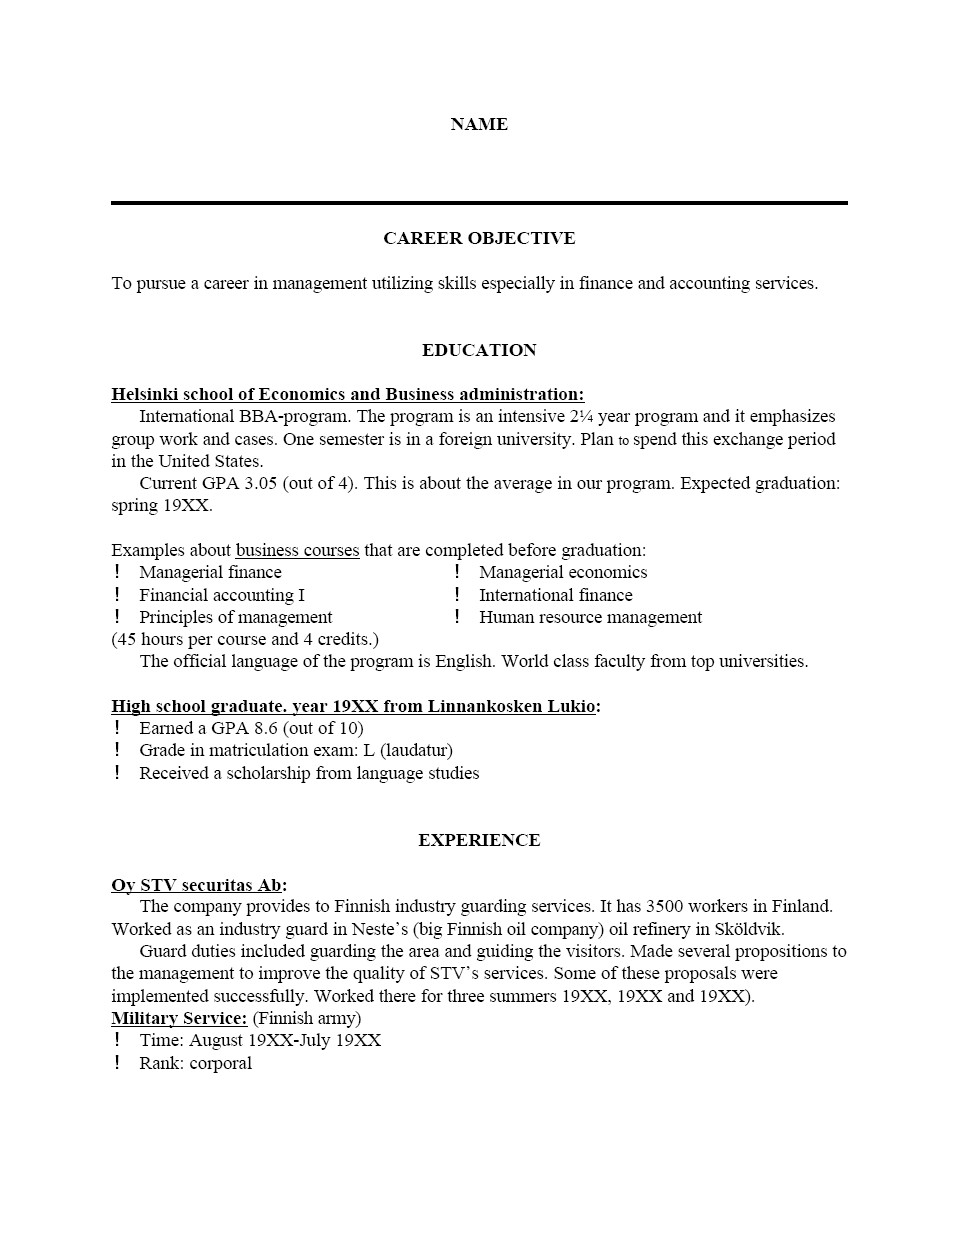 Free Sample Resume Template Cover Letter and Resume